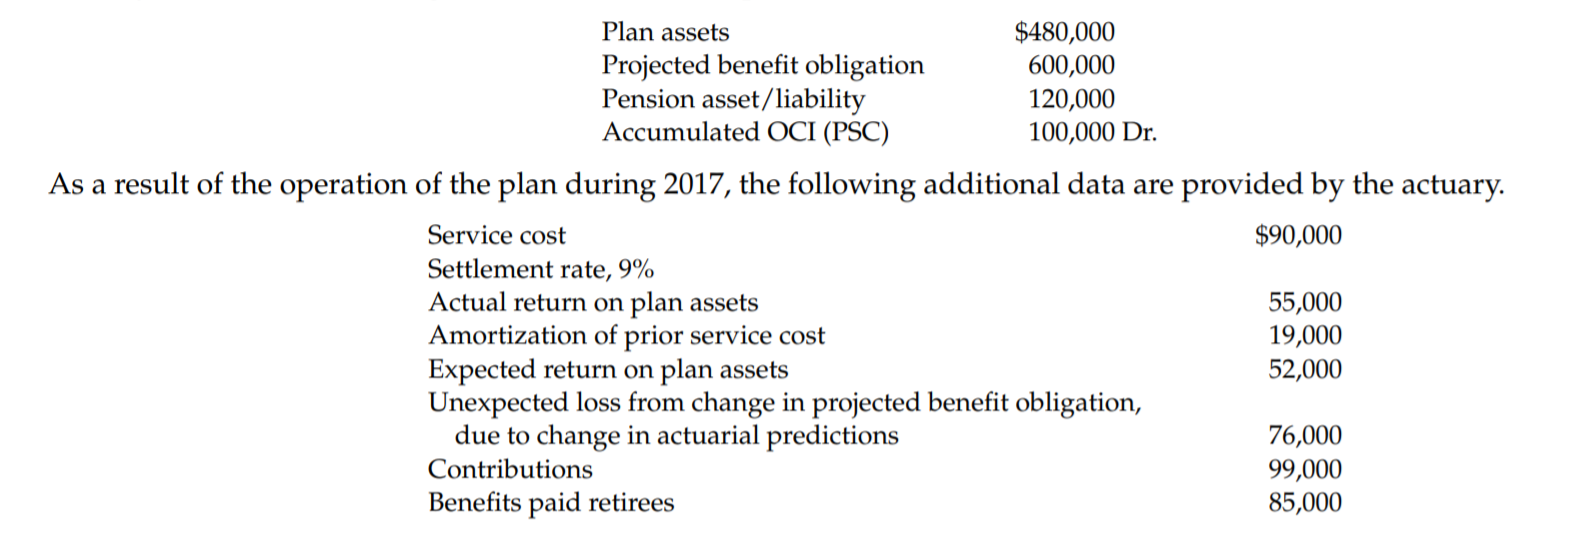 Plan assets
Projected benefit obligation
Pension asset/liability
Accumulated OCI (PSC)
$480,000
600,000
120,000
100,000 Dr.
As a result of the operation of the plan during 2017, the following additional data are provided by the actuary.
Service cost
$90,000
Settlement rate, 9%
Actual return on plan assets
Amortization of prior service cost
Expected return on plan assets
Unexpected loss from change in projected benefit obligation,
due to change in actuarial predictions
55,000
19,000
52,000
76,000
Contributions
99,000
85,000
Benefits paid retirees
